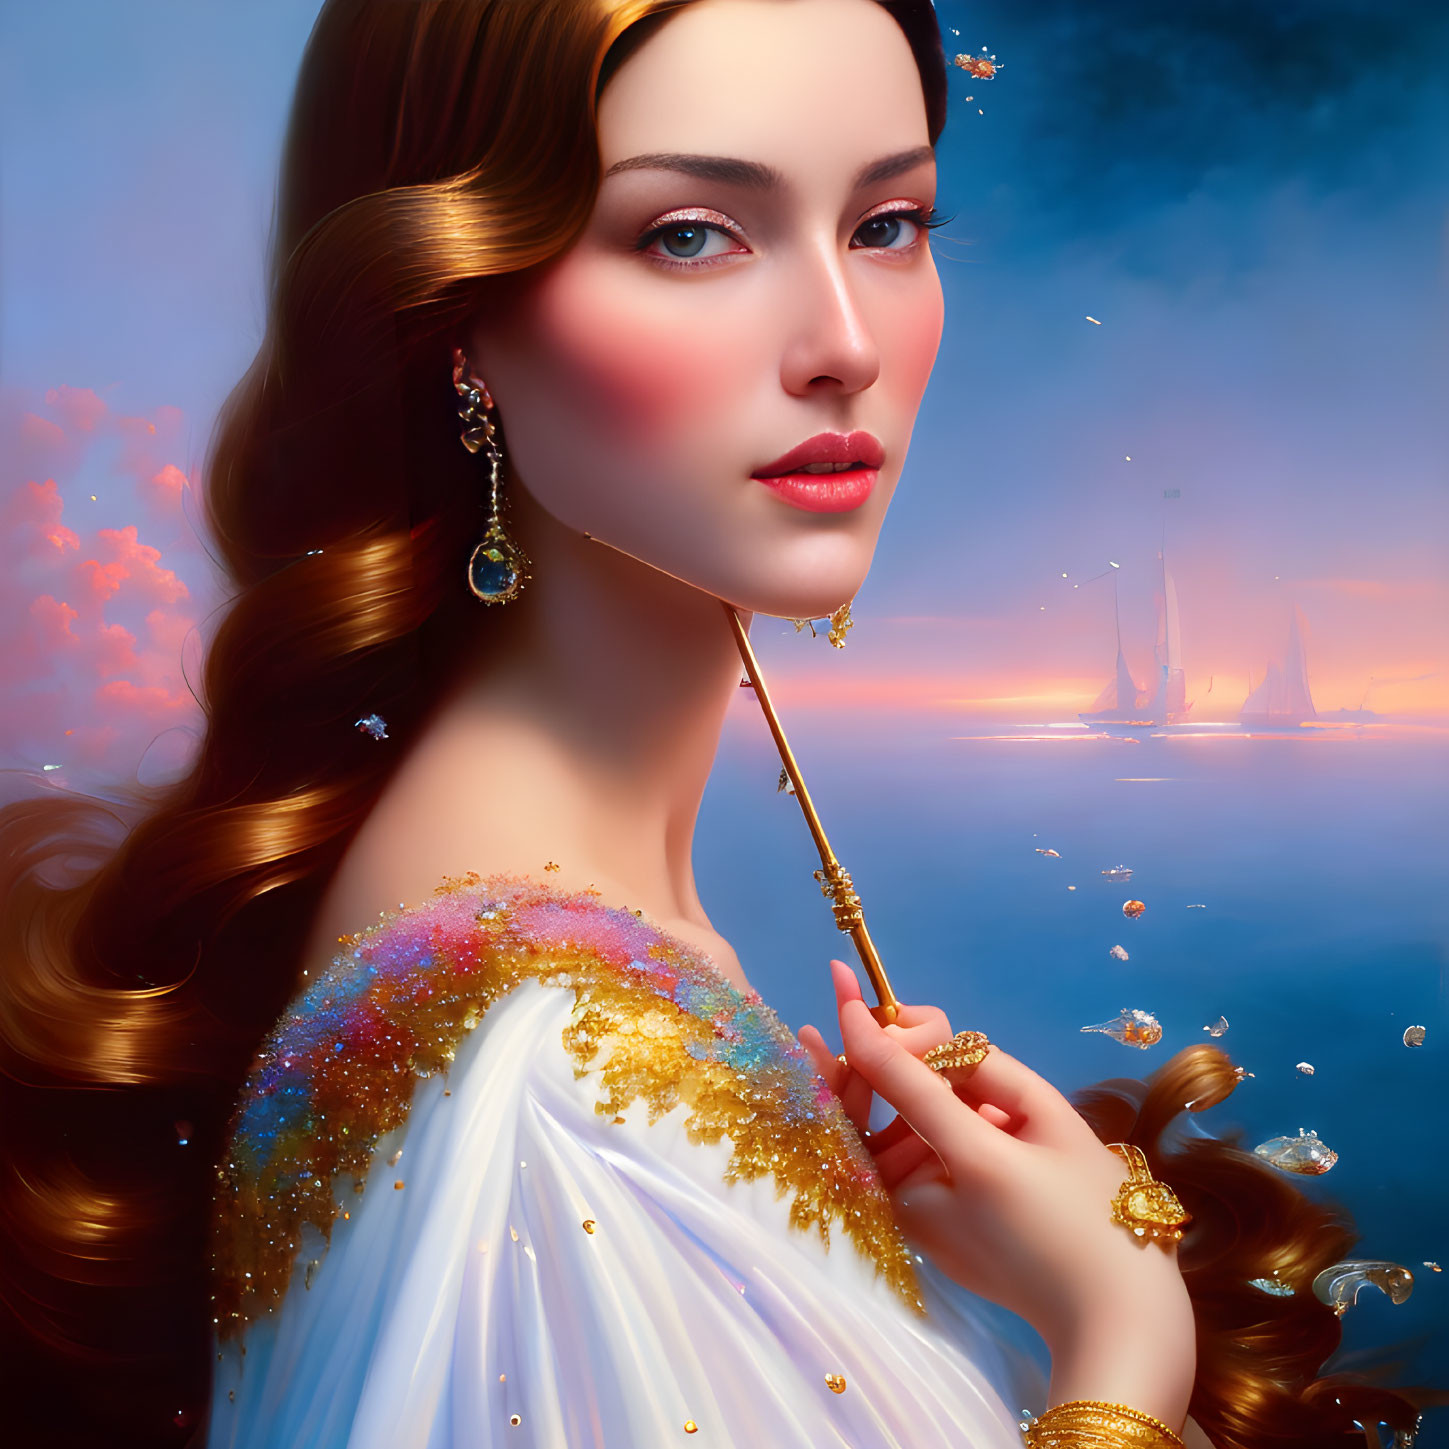 Illustrated woman with golden object in white dress against dreamy sky and sailing ships